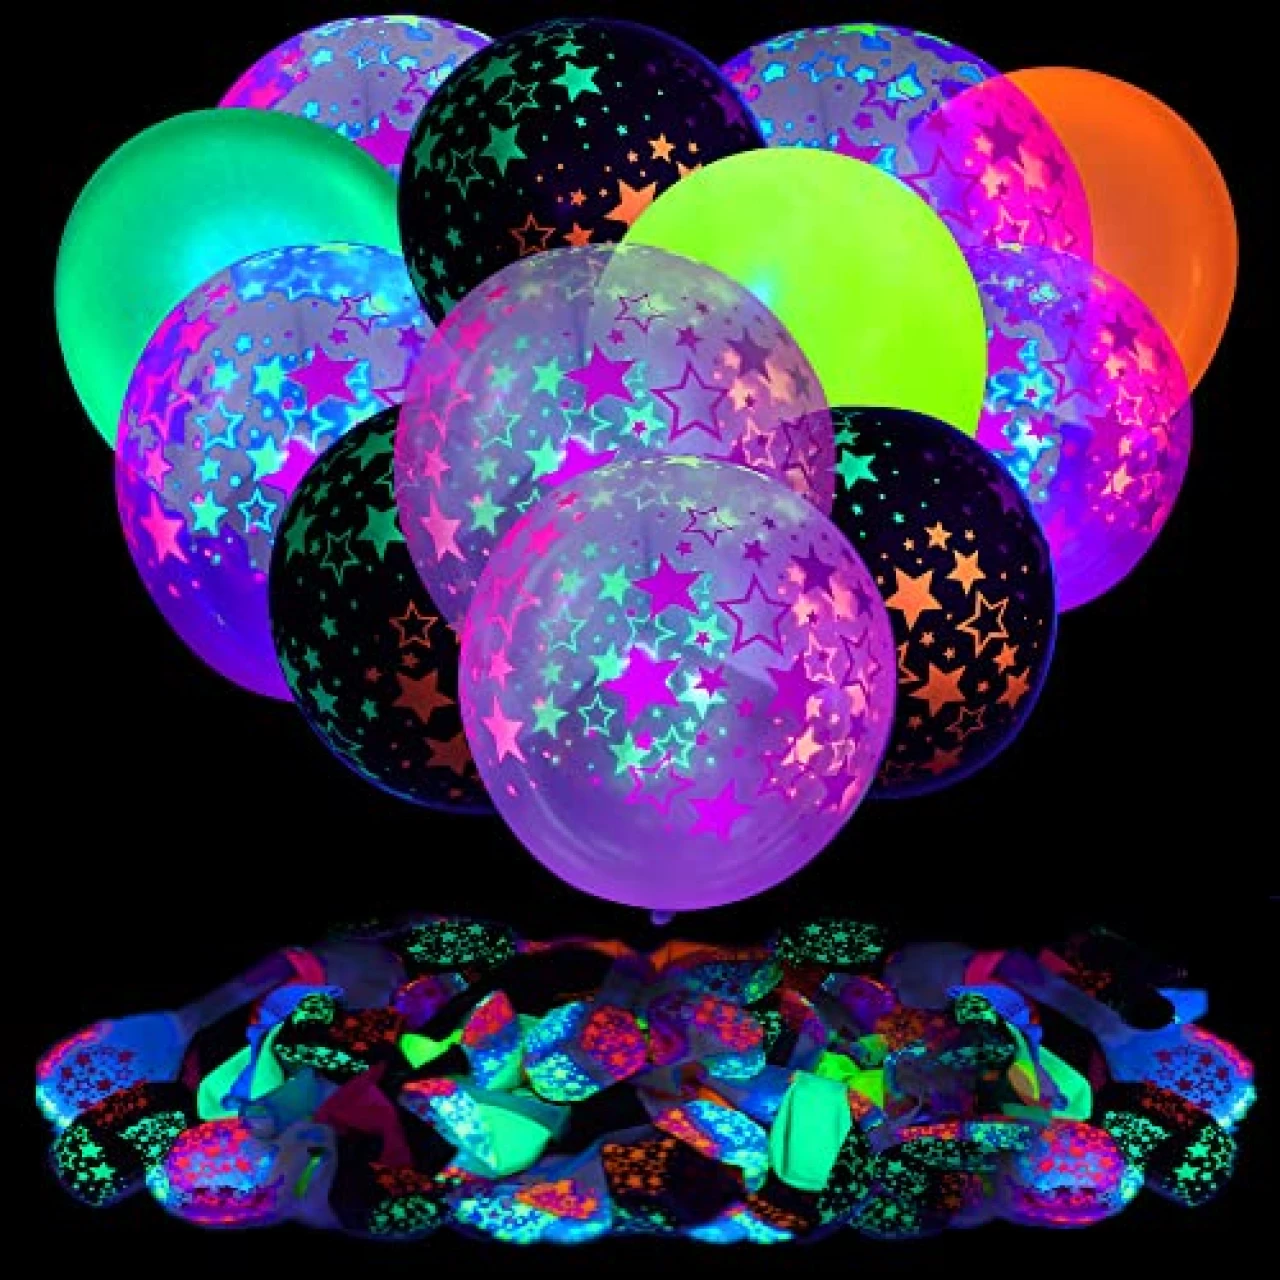 90 Pcs UV Neon Balloons ,Neon Stars Glow Party Balloons UV Black Light Balloons Glow in the dark for Birthday Decorations Wedding Glow Party Supplies Blacklight Carnival Reactive Fluorescent Balloons